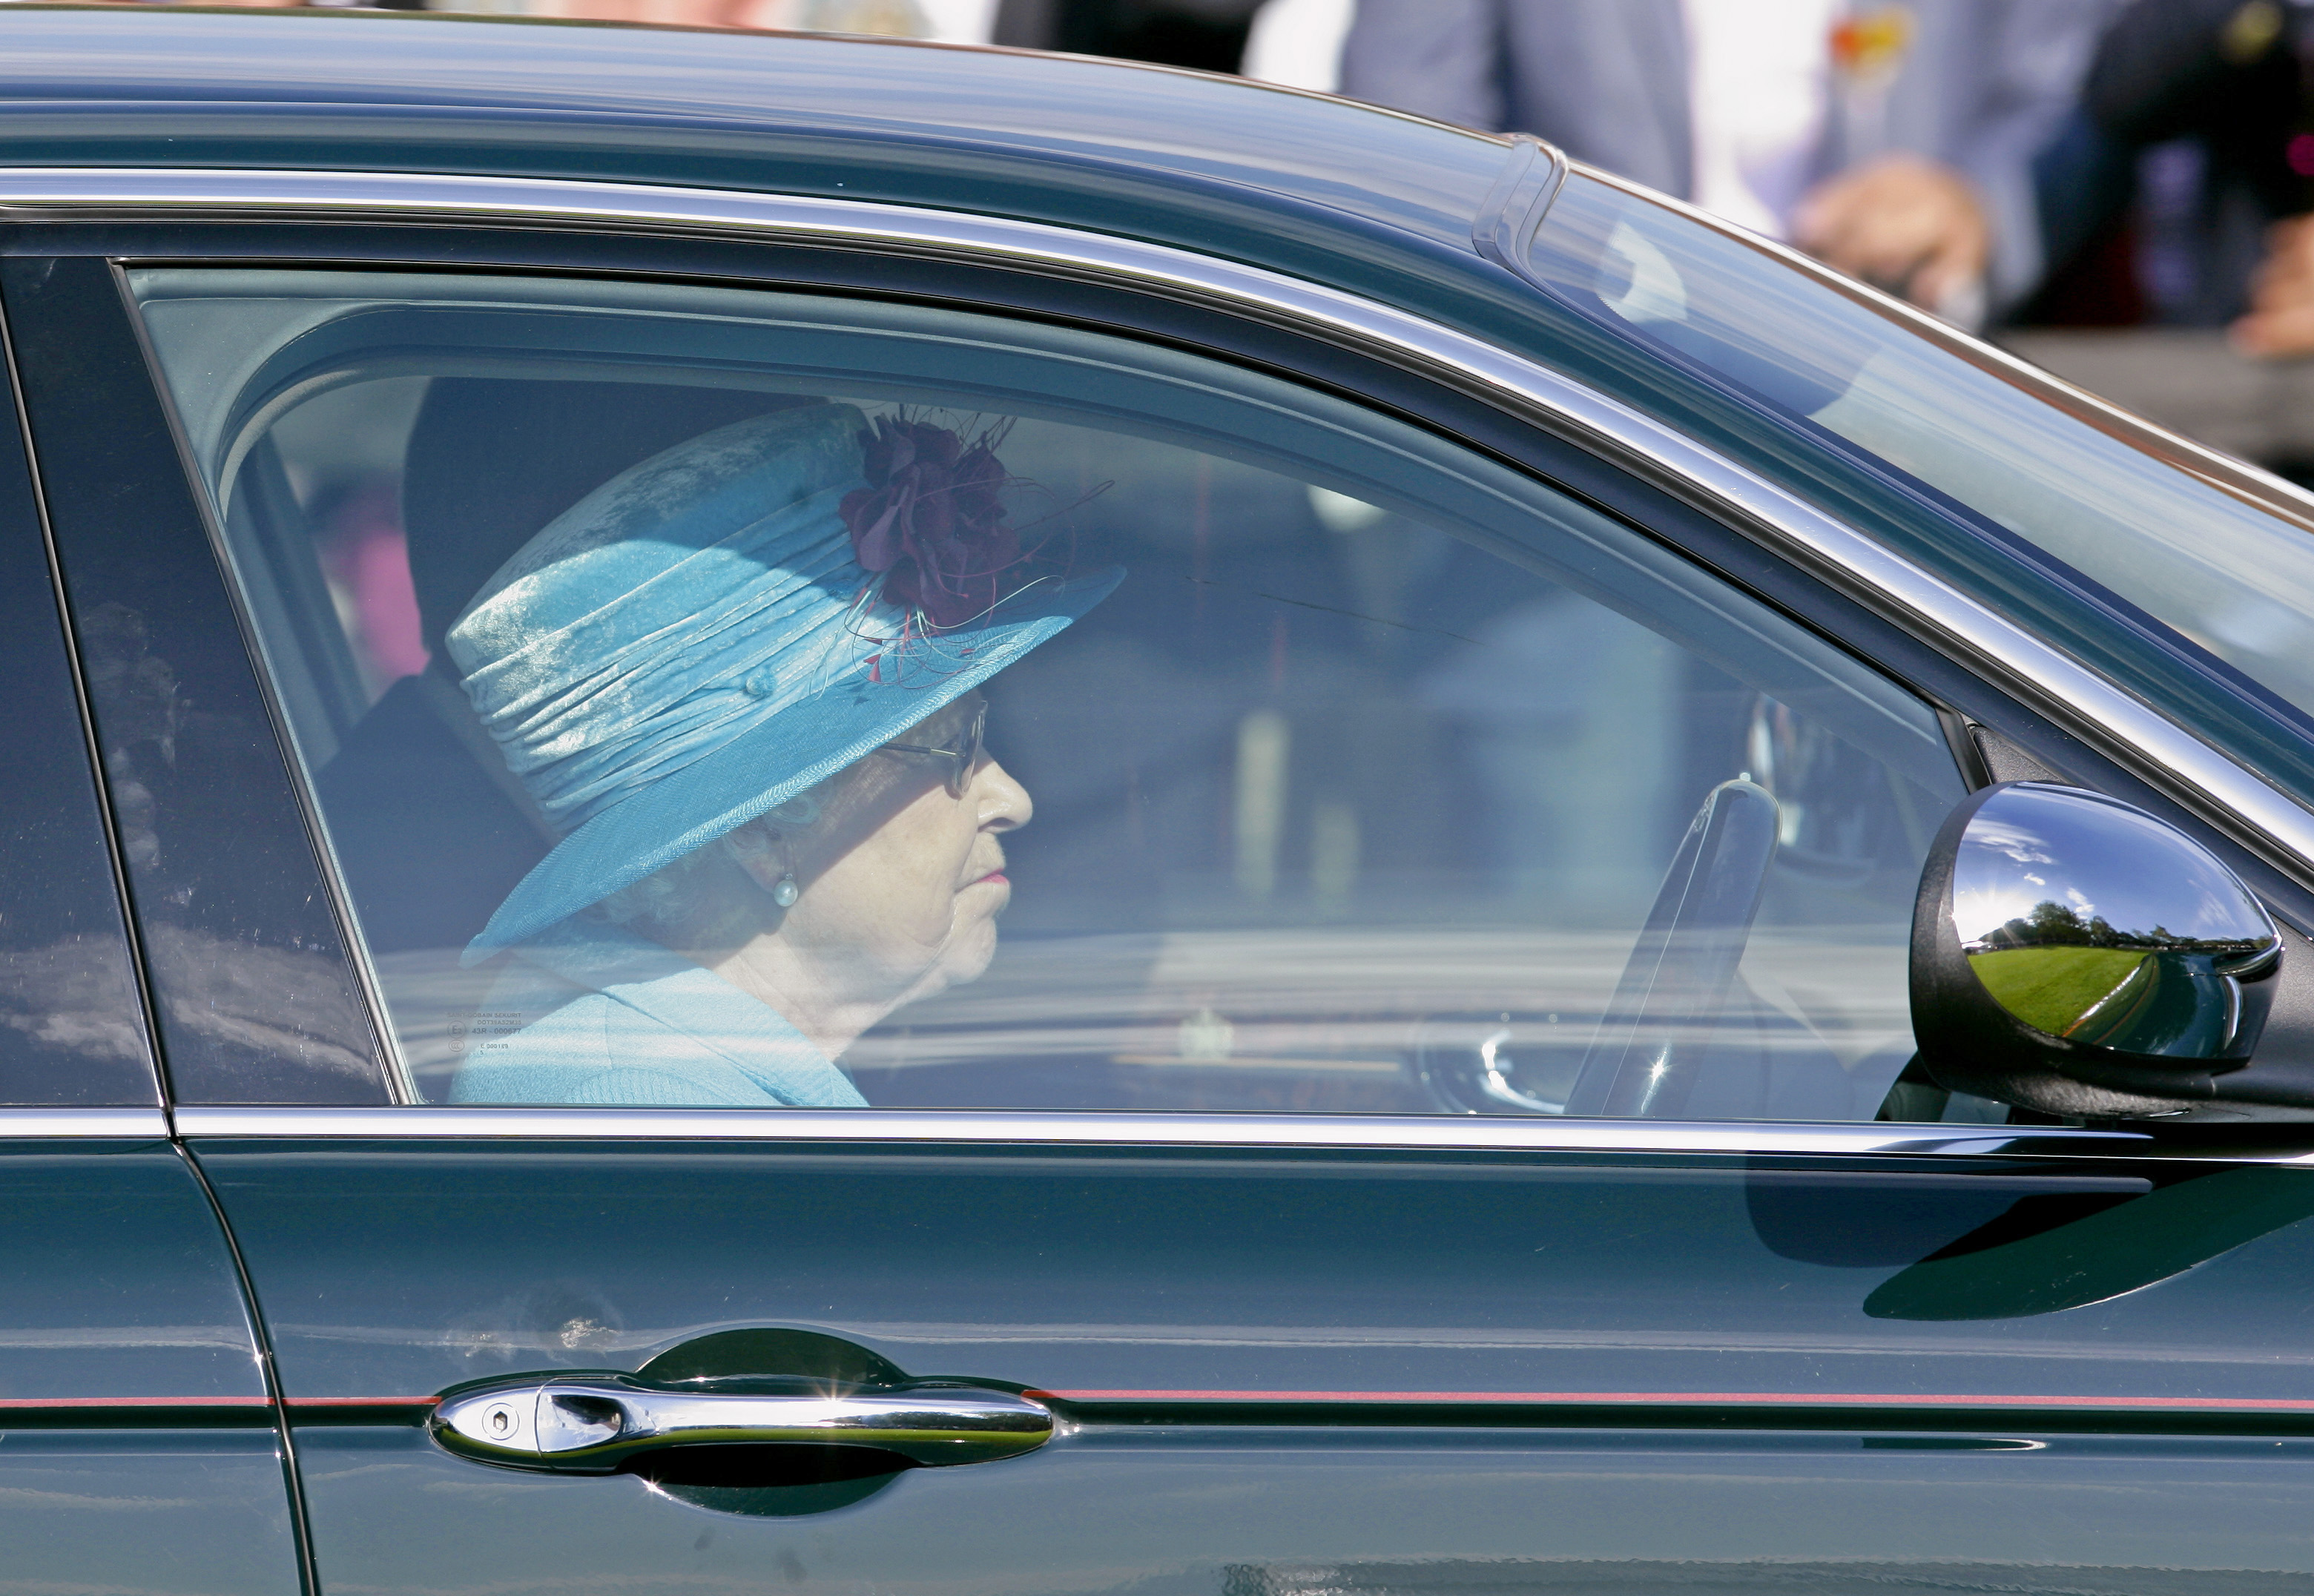 EGHAM, UNITED KINGDOM - JUNE 13: (EMBARGOED FOR PUBLICATION IN UK NEWSPAPERS UNTIL 48 HOURS AFTER CREATE DATE AND TIME) HM Queen Elizabeth II drives her Jaguar car as she leaves after watching the the final of the Harcourt Developments Queen's Cup polo tournament at Guards Polo Club on June 13, 2010 in Egham, England. (Photo by Indigo/Getty Images) (Max Mumby/Indigo&mdash;Getty Images)